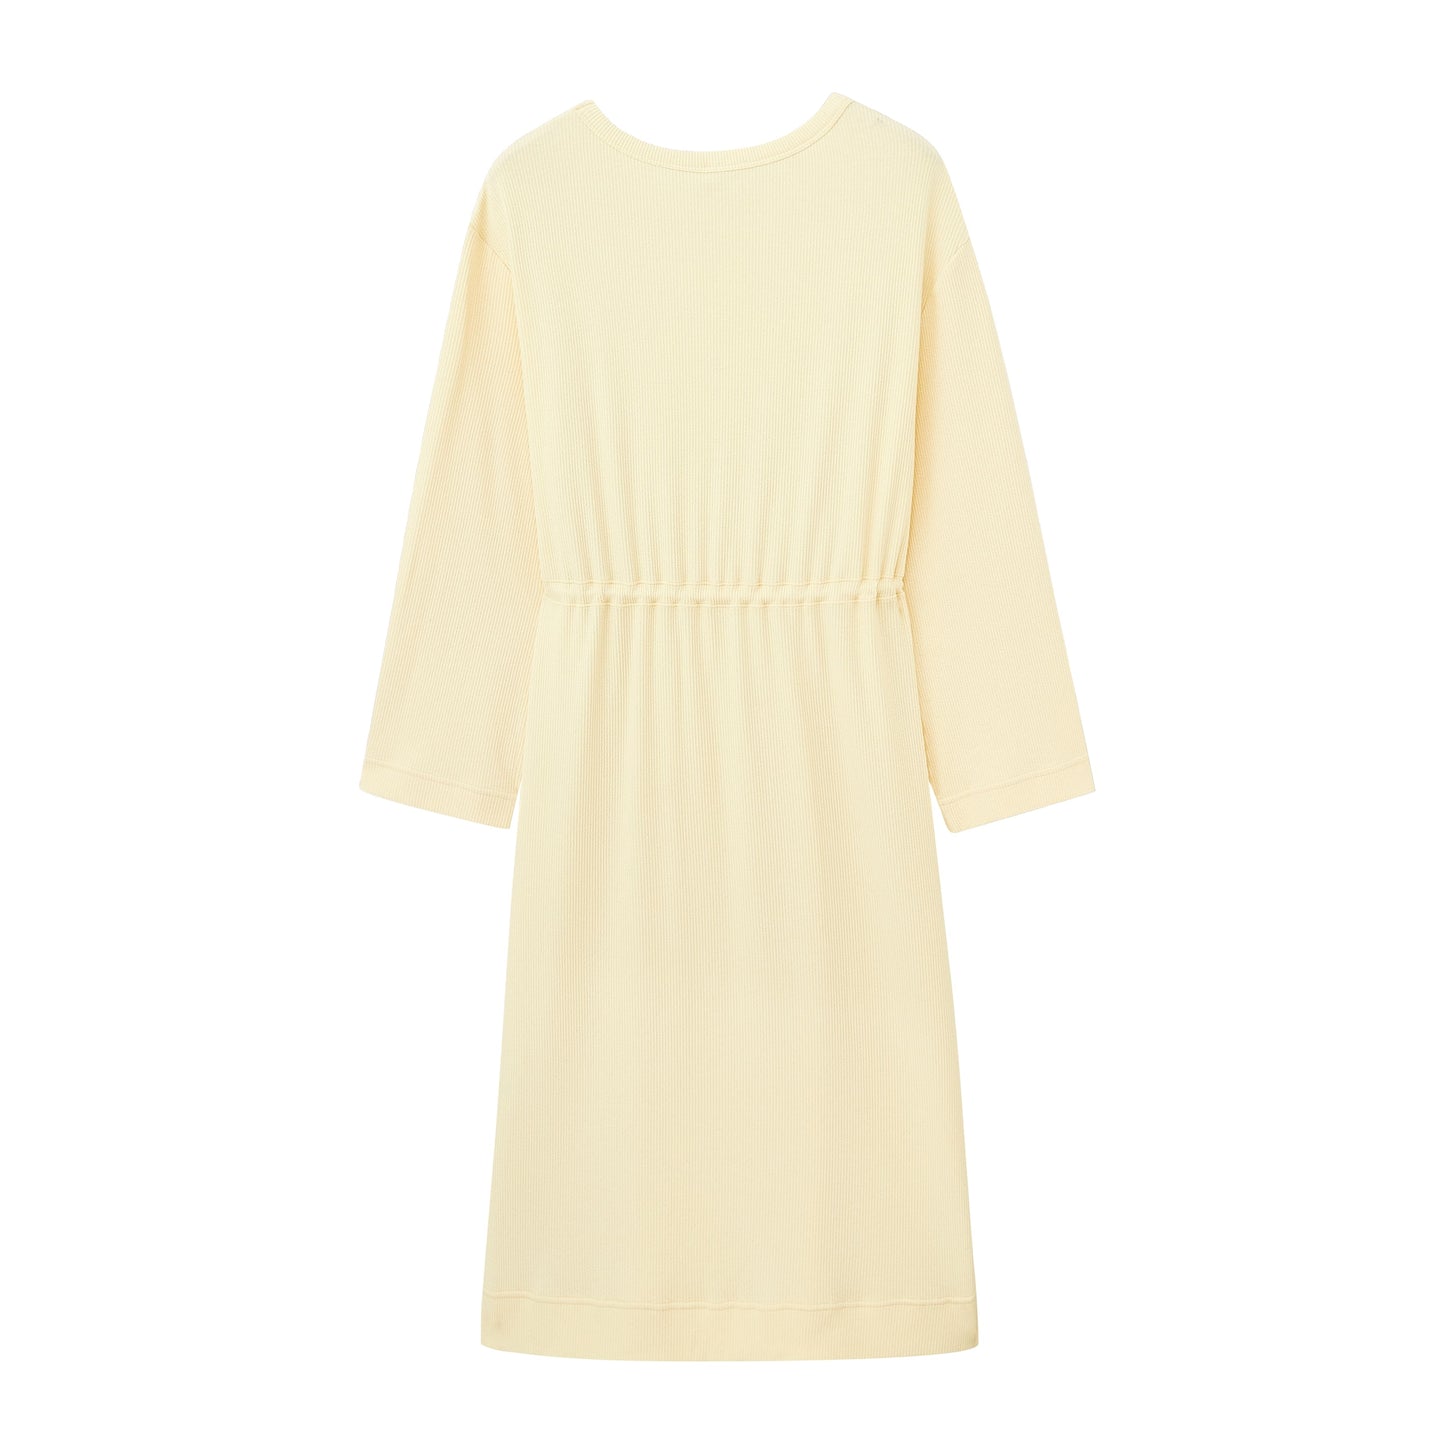 flay lay image of the long sleeve yellow pajama dress with waist drawstring from back